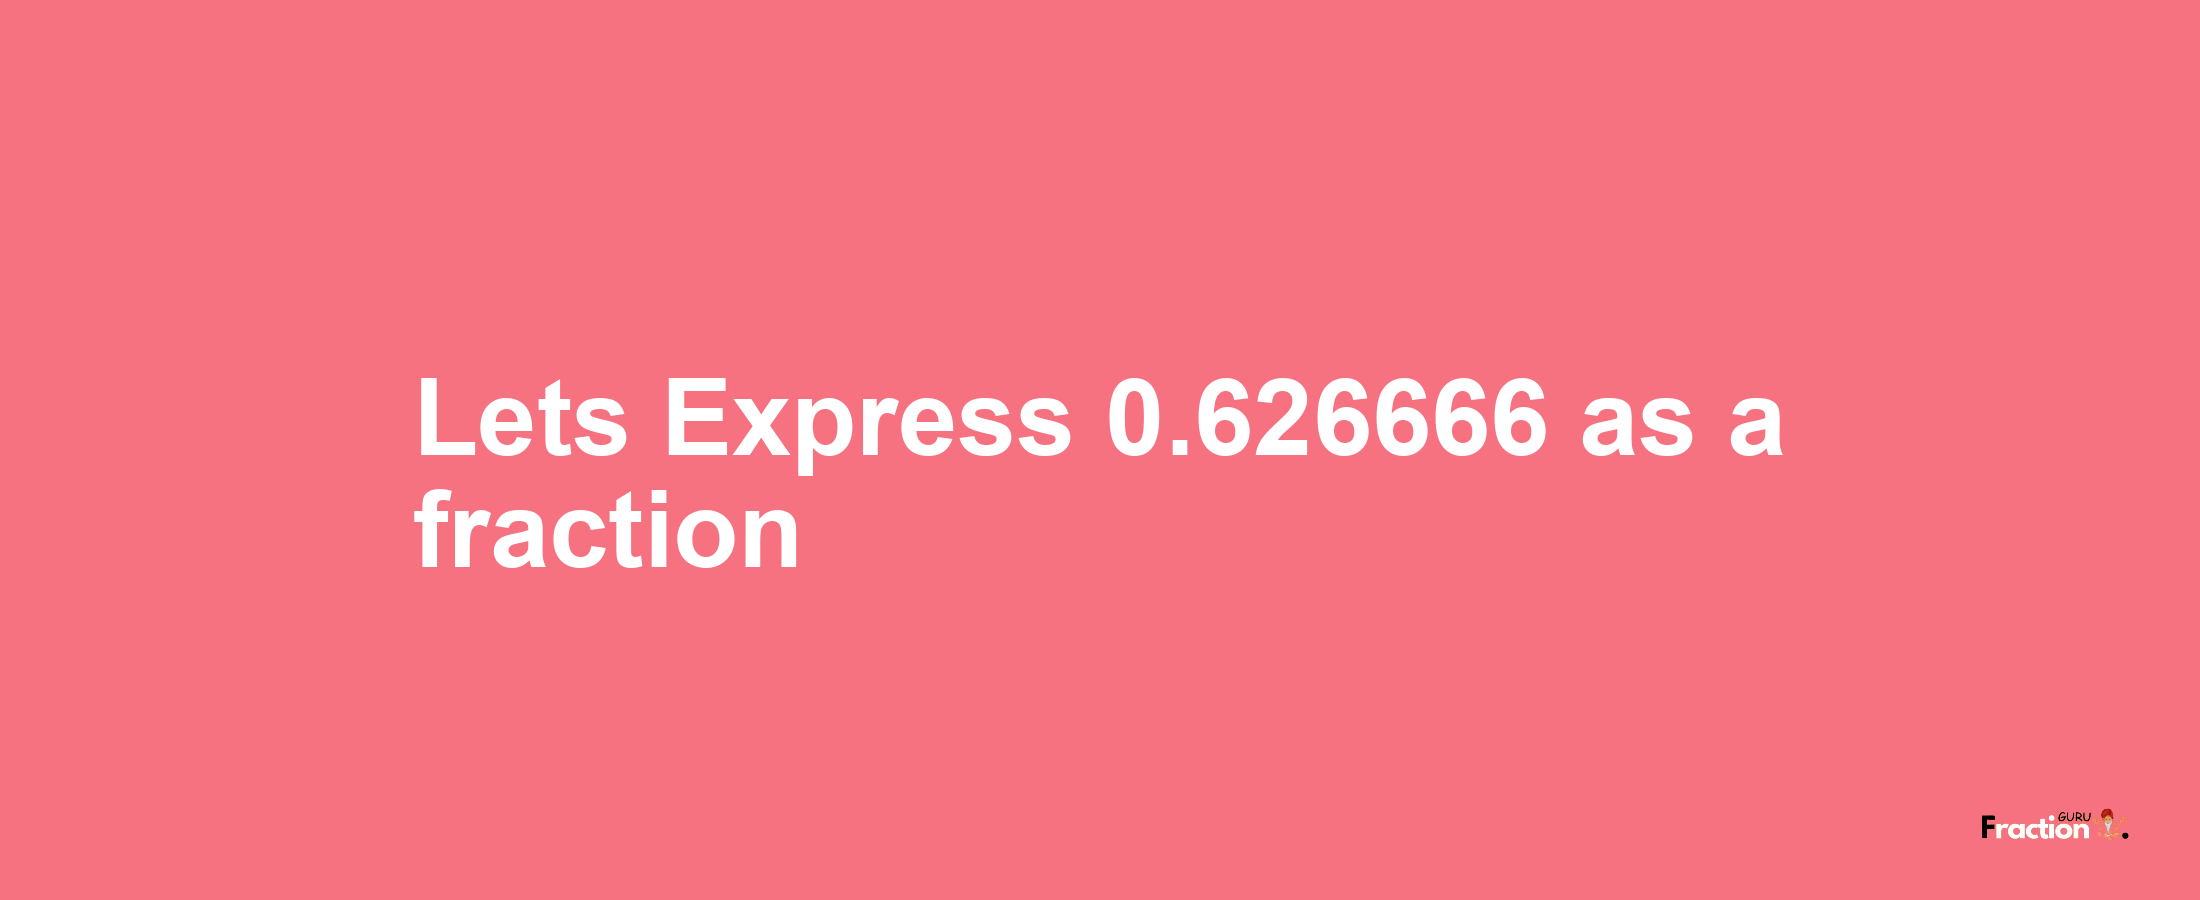 Lets Express 0.626666 as afraction